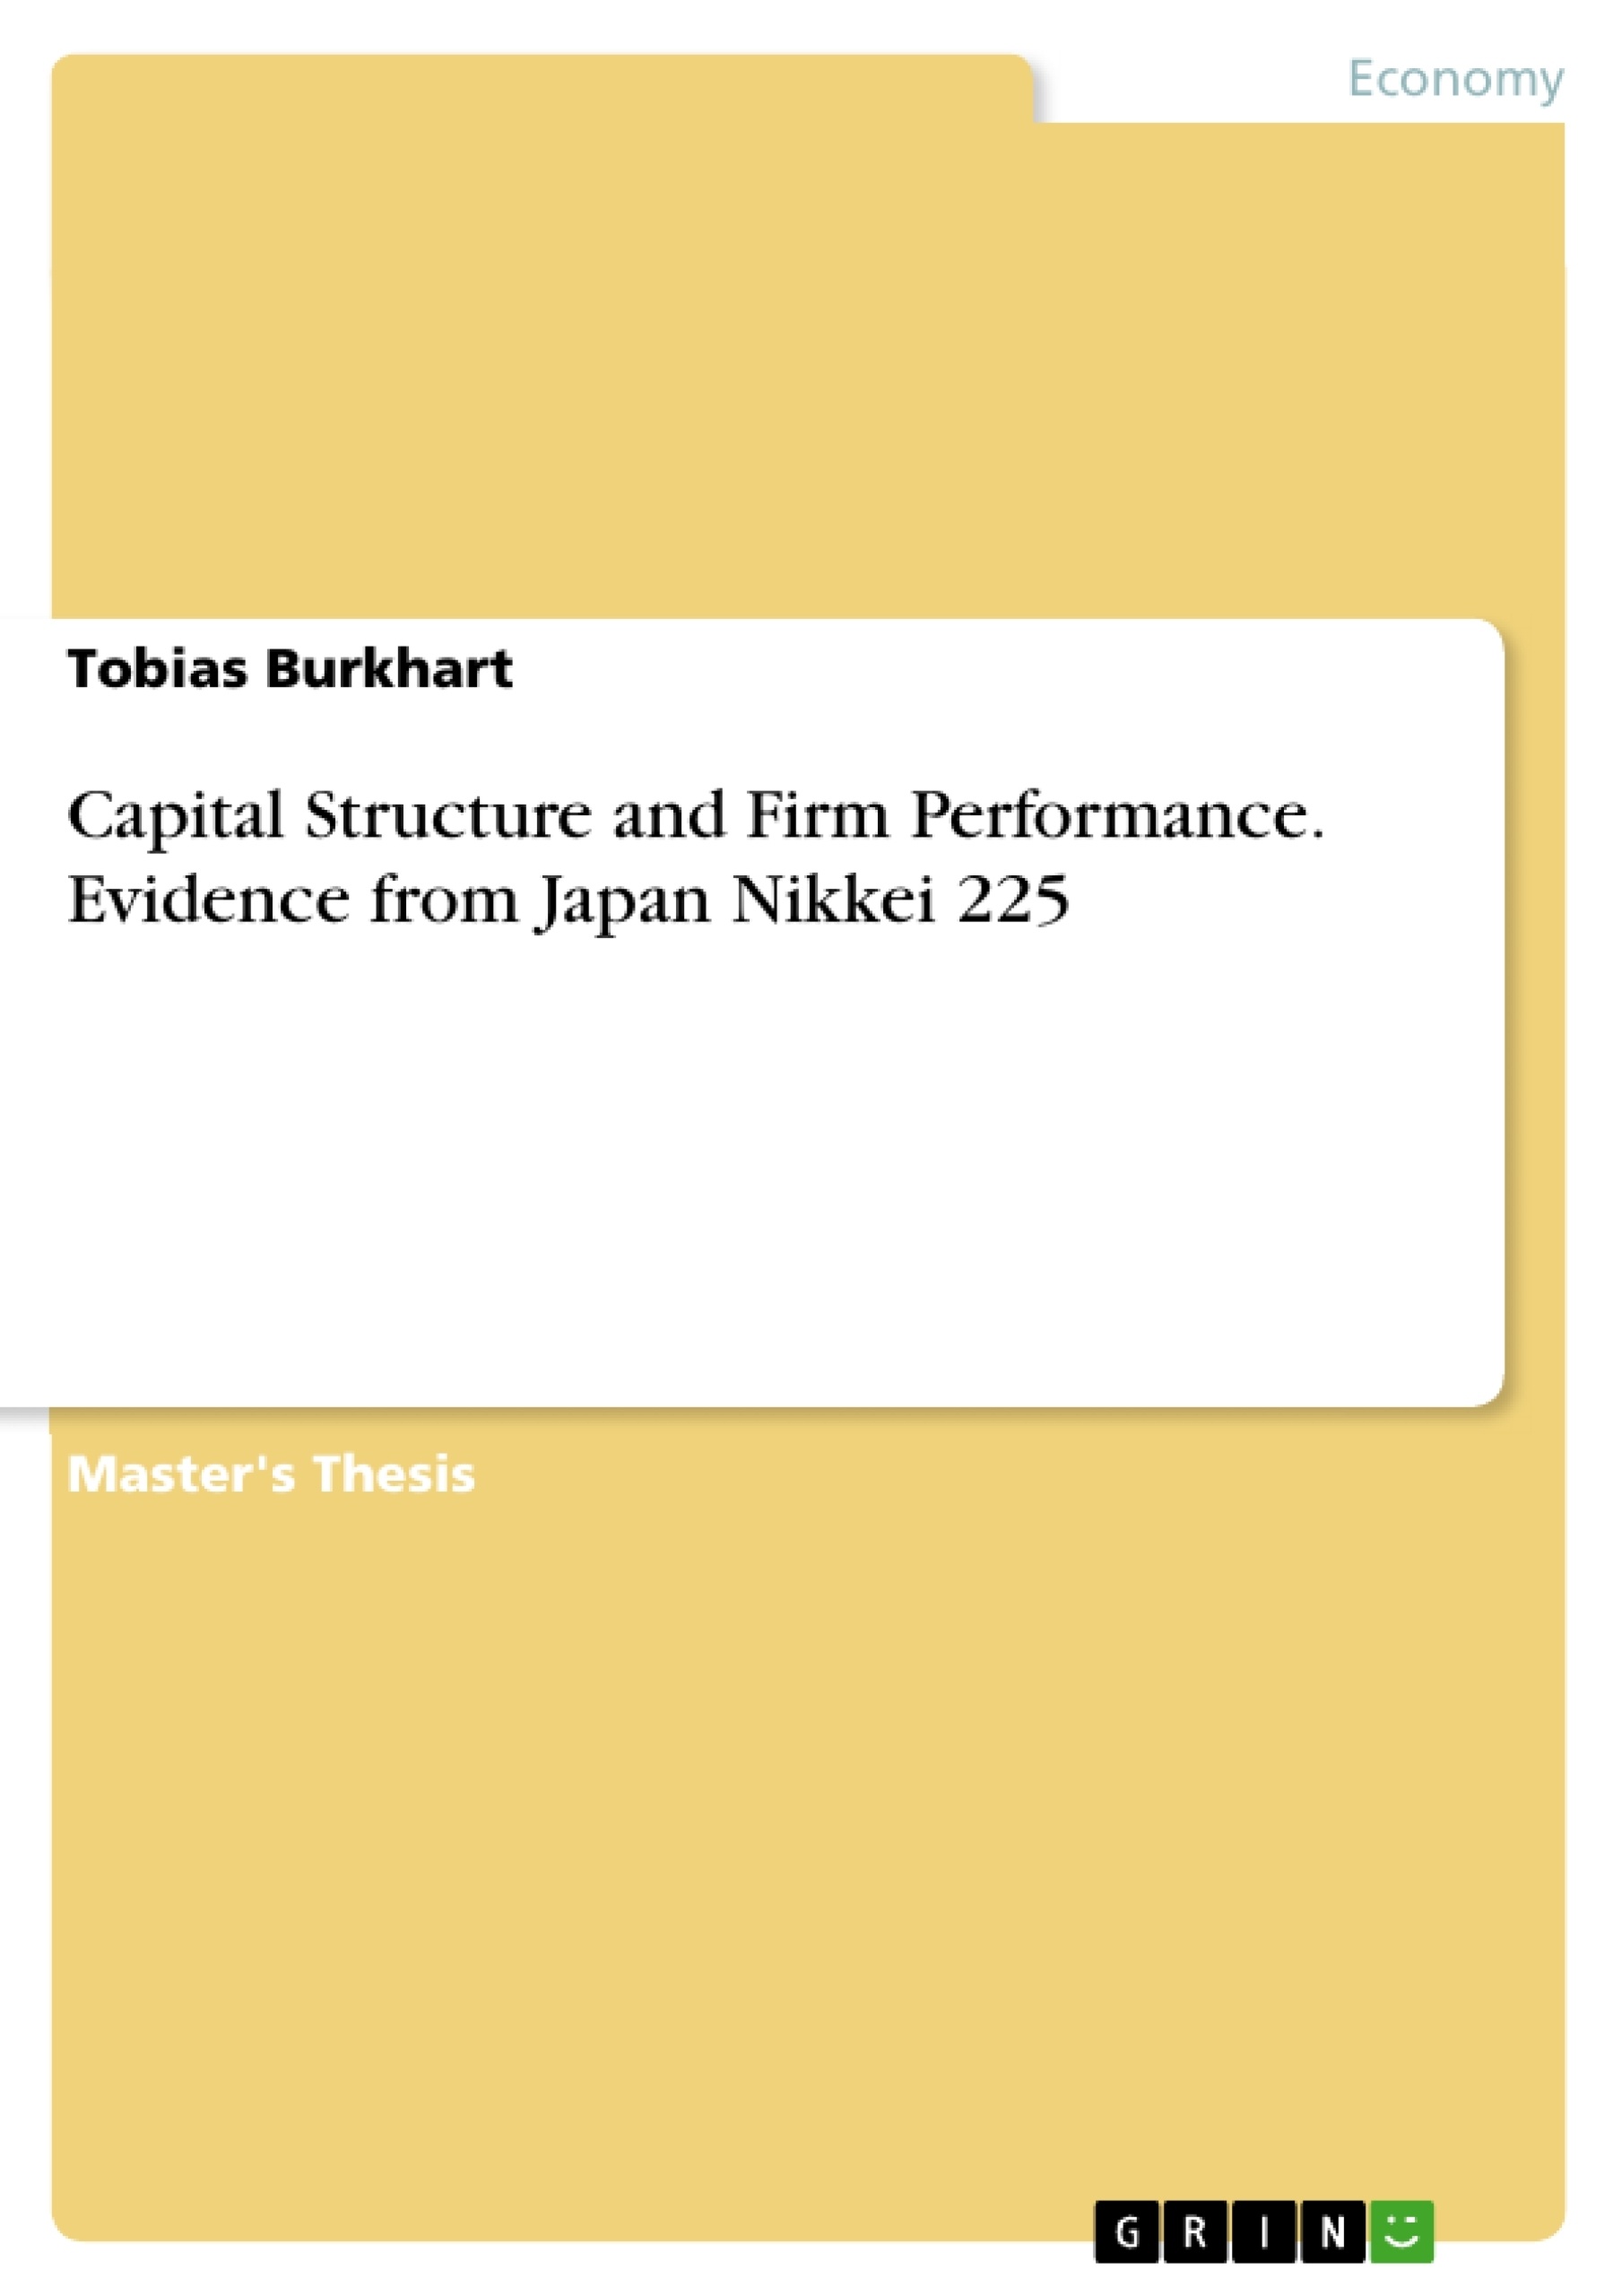 Title: Capital Structure and Firm Performance. Evidence from Japan Nikkei 225